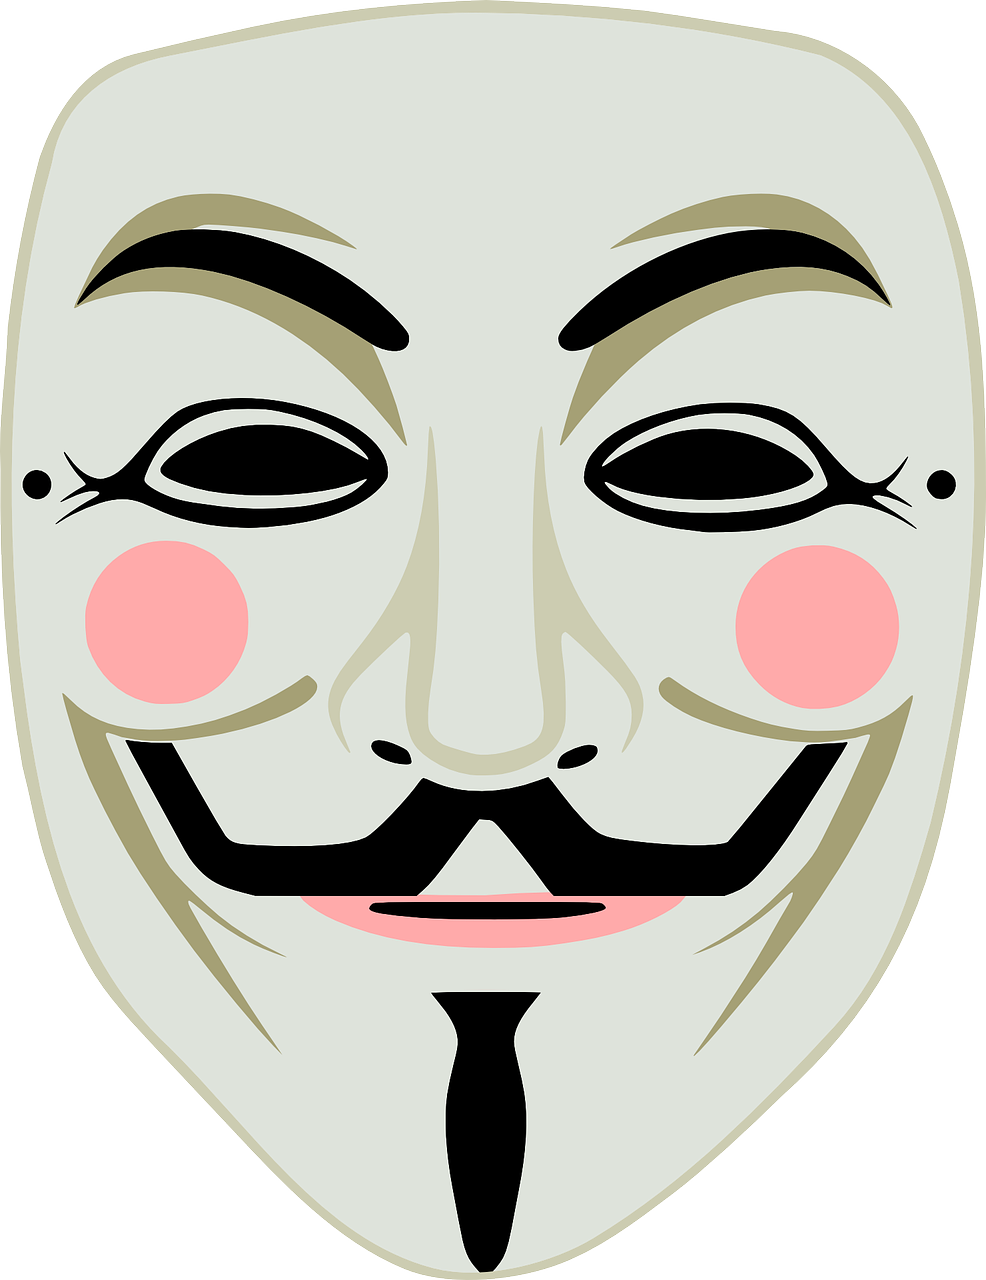 fawkes fawkes mask guy free photo